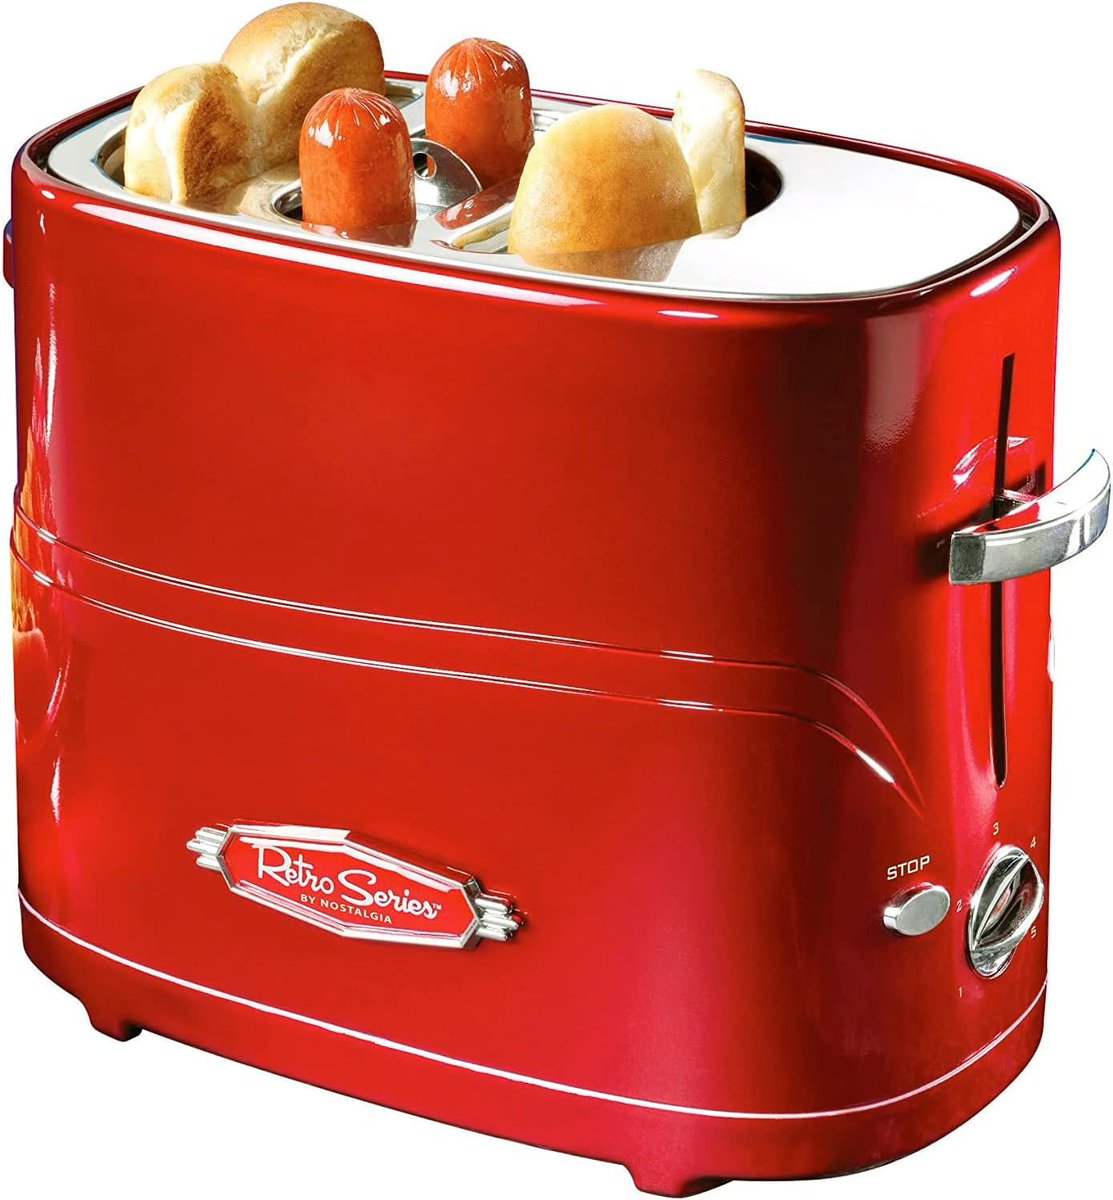 I'm so tired of having to cook hot dogs and toast the buns on a griddle, I wish my toaster had a spot for cooking franks---??!! zdcs.link/eLwdW